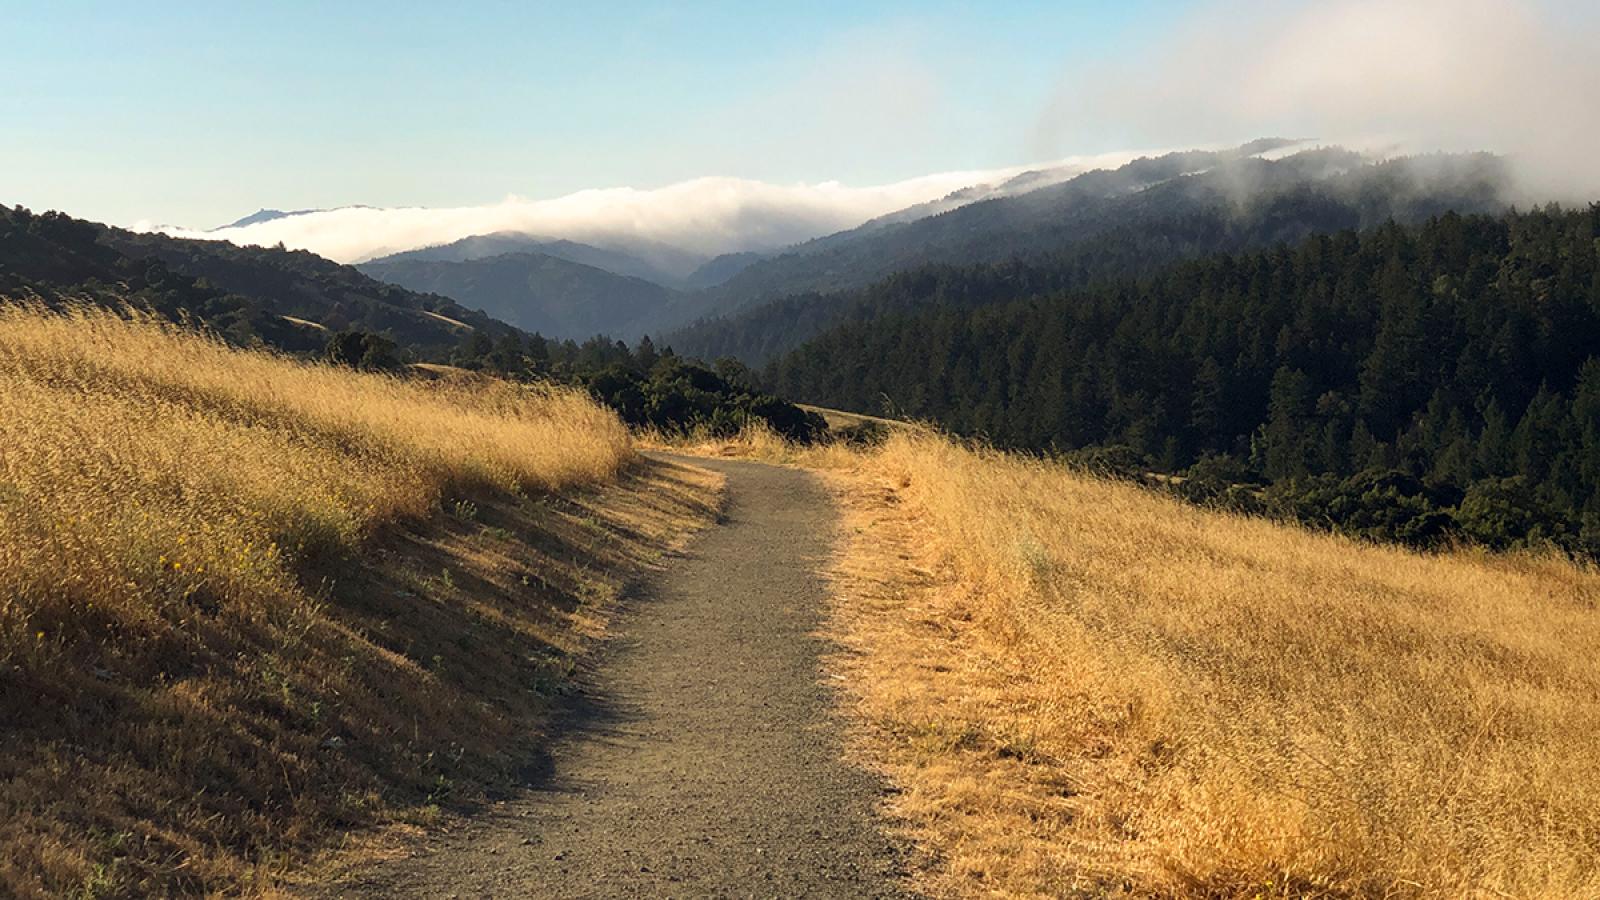 a trail running between golden grasslands with fog along the ridgeline in the background